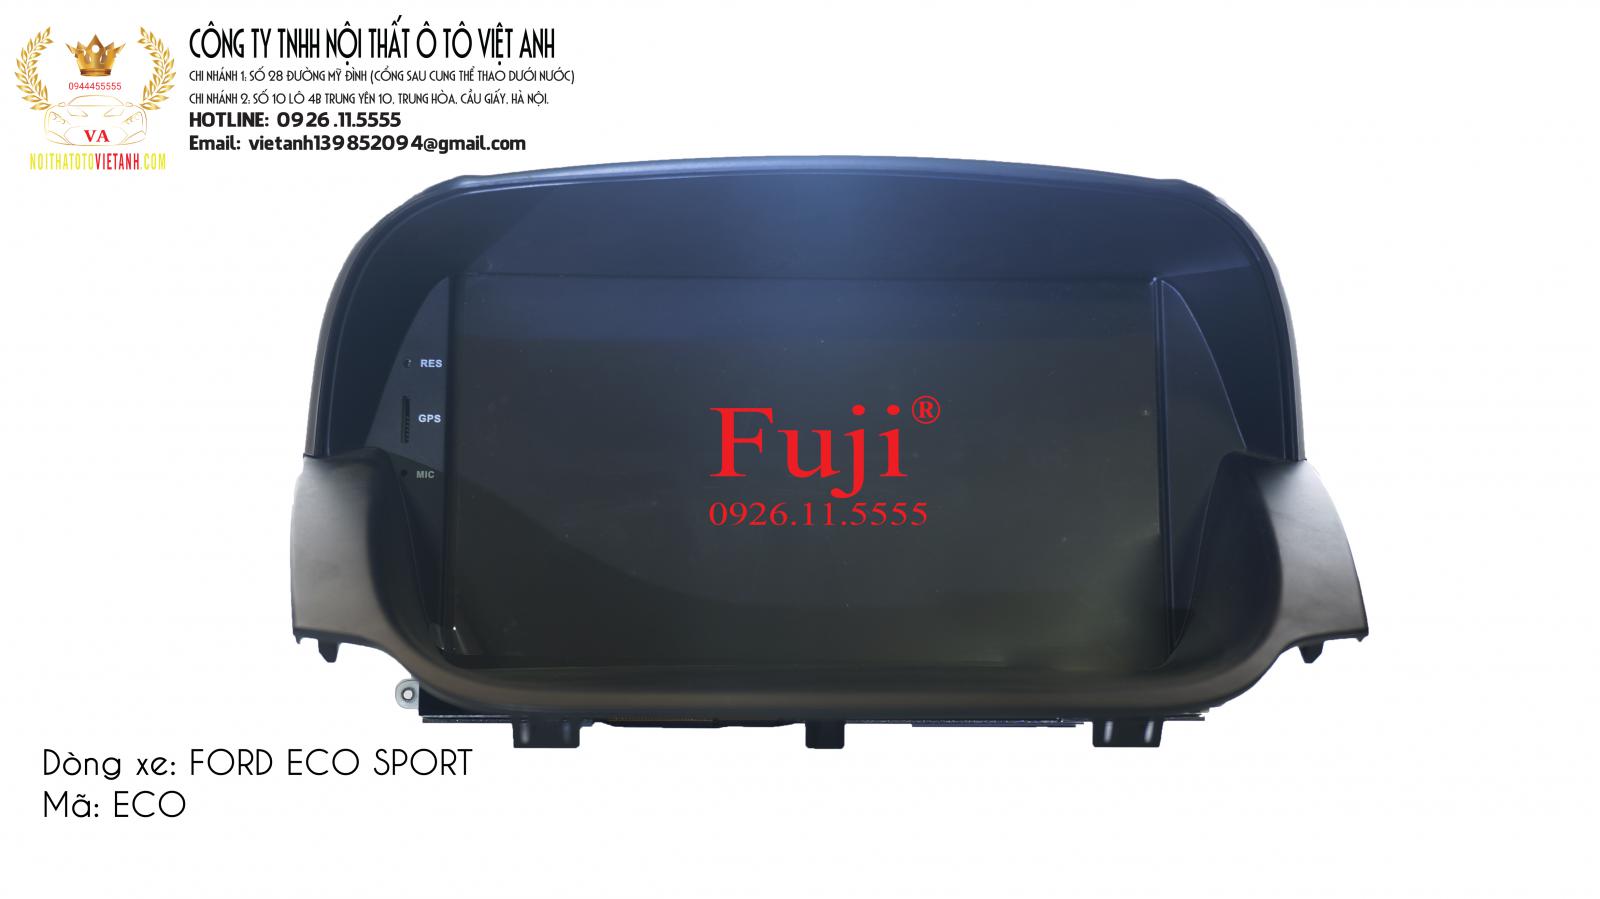 DVD FUJI THEO XE FOR ECO SPORT